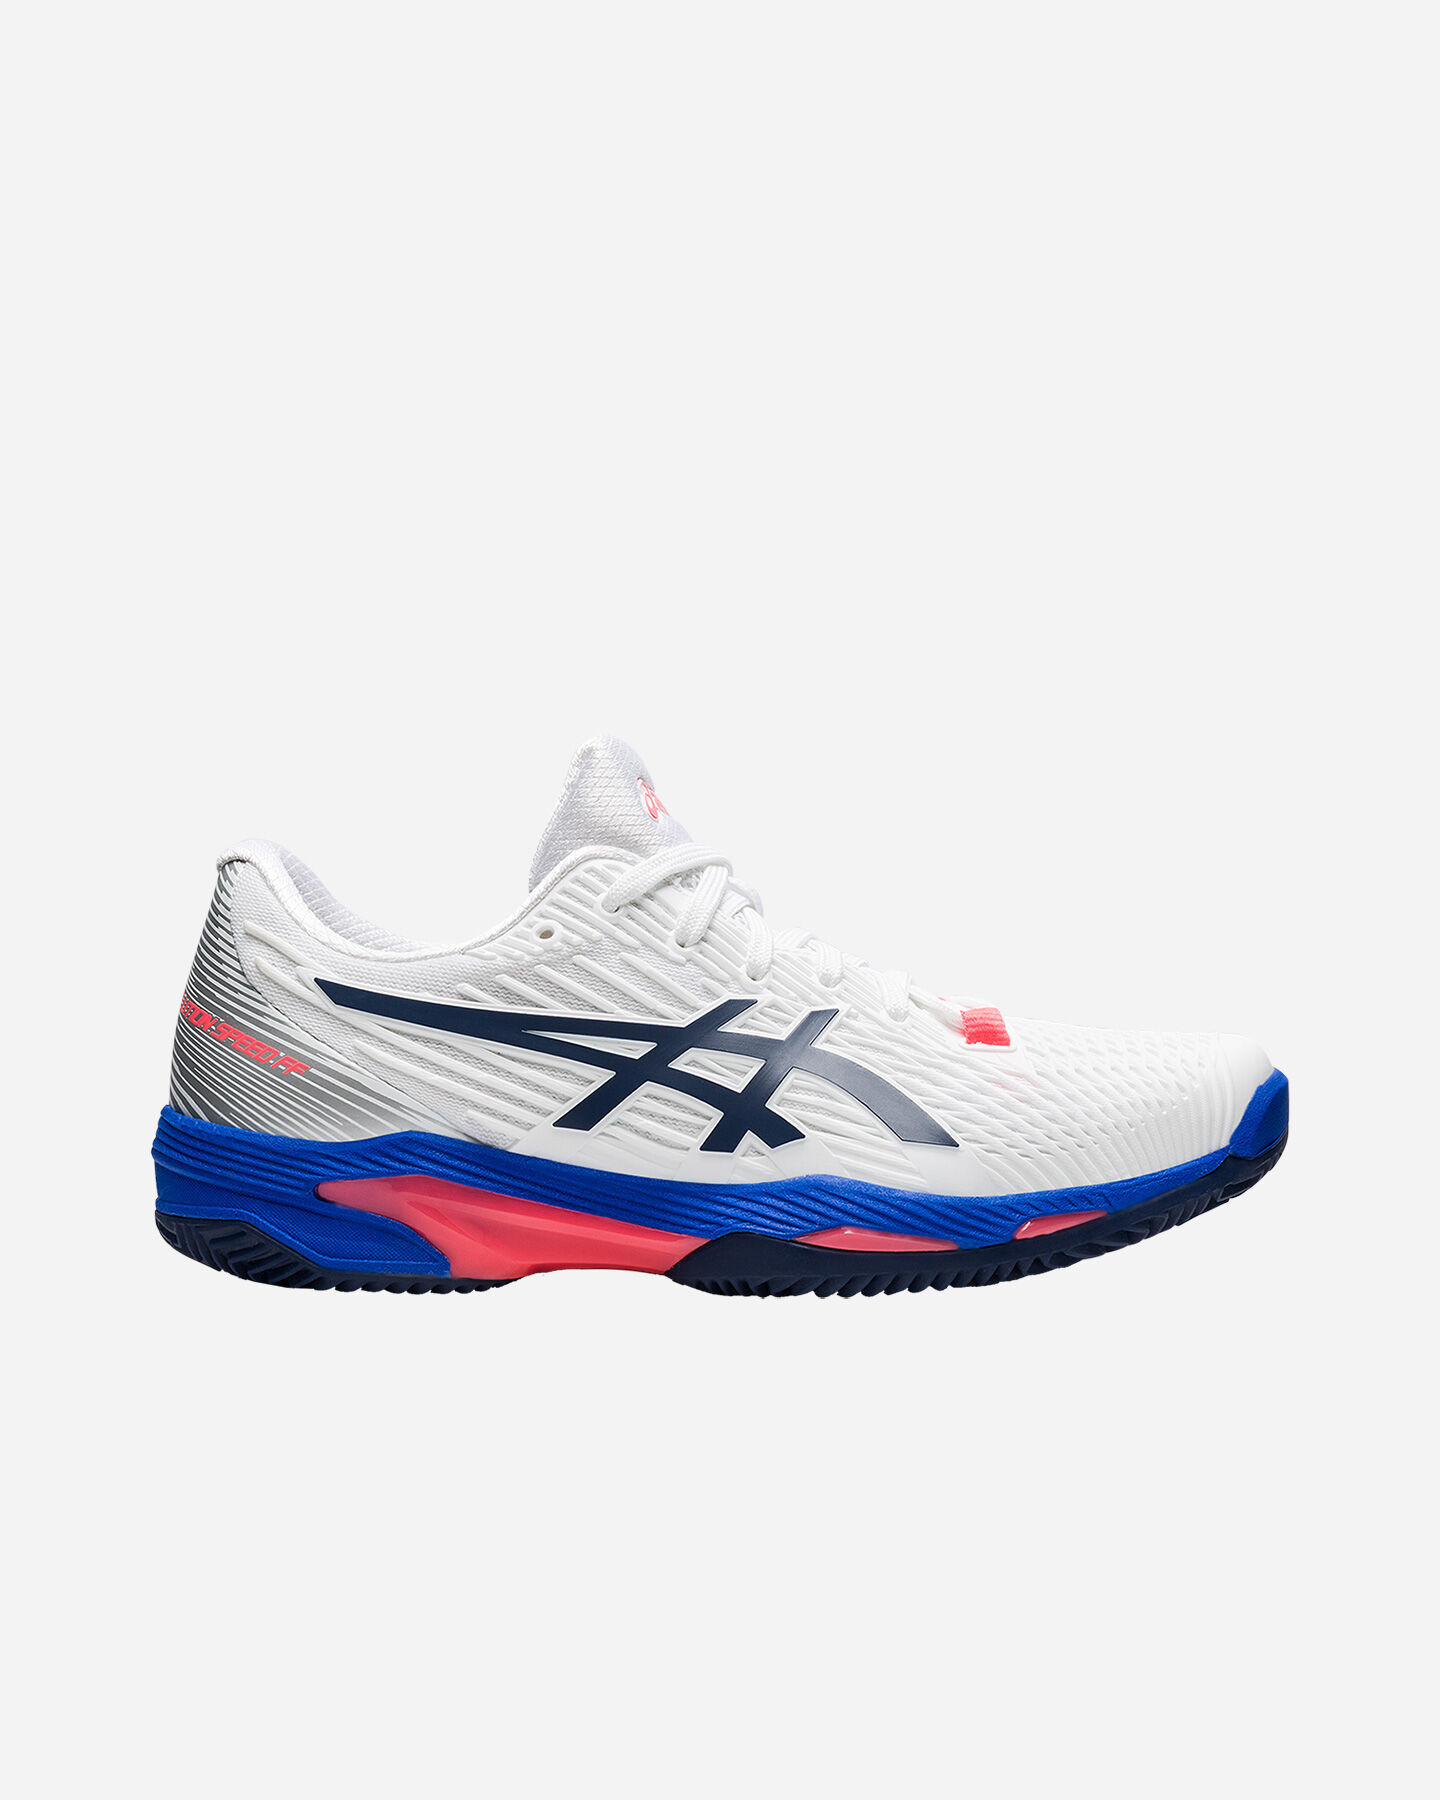  Scarpe tennis ASICS SOLUTION SPEED FF 2 CLAY W S5341366|102|5 scatto 0